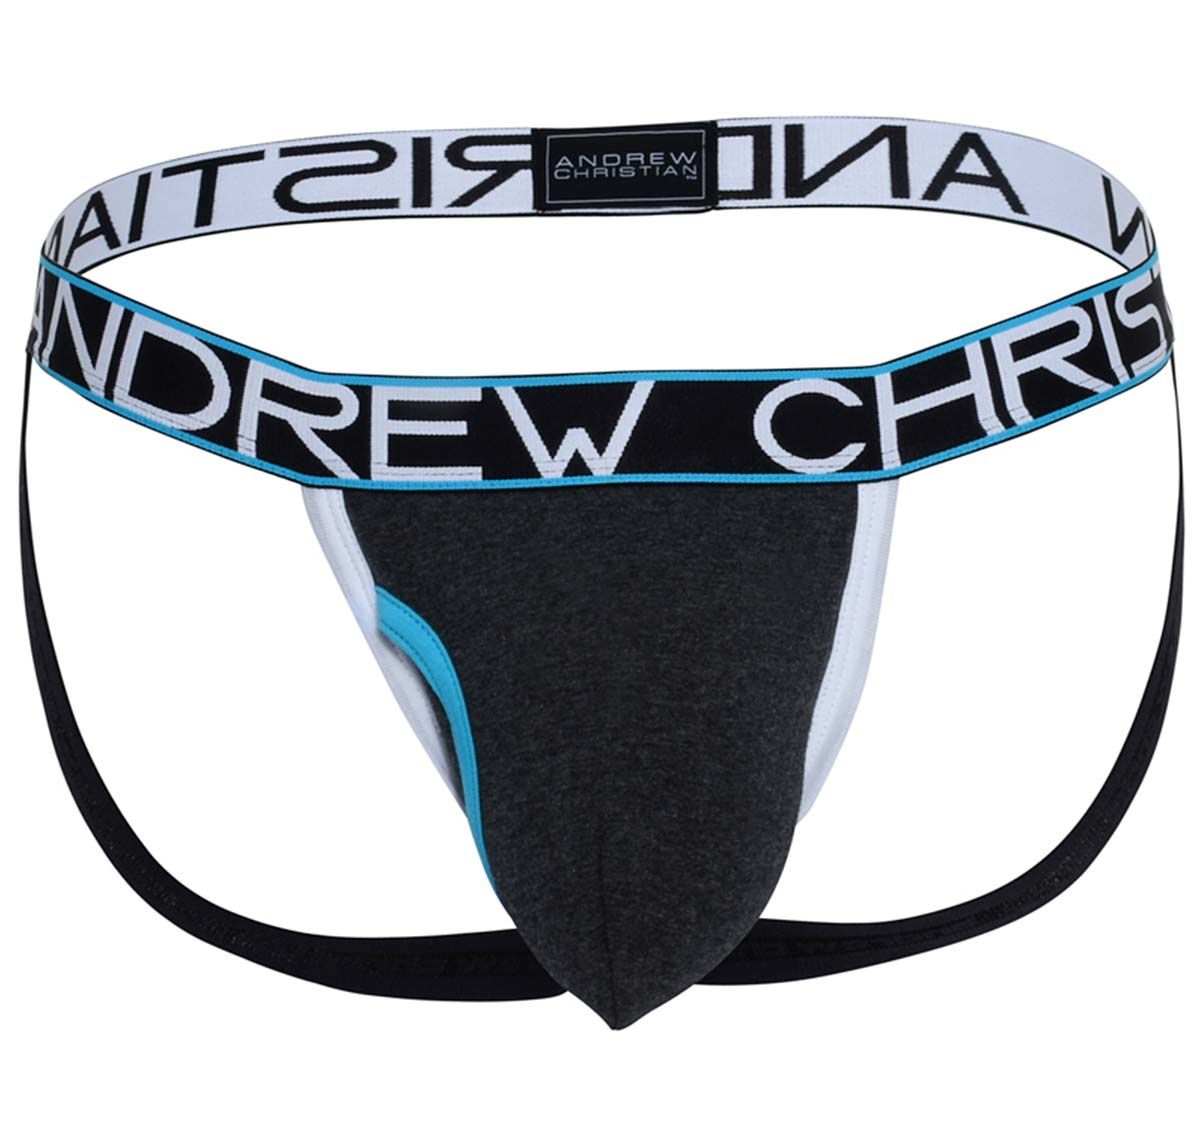 Andrew Christian Suspensorio FLY Jock w/ ALMOST NAKED 92364, gris